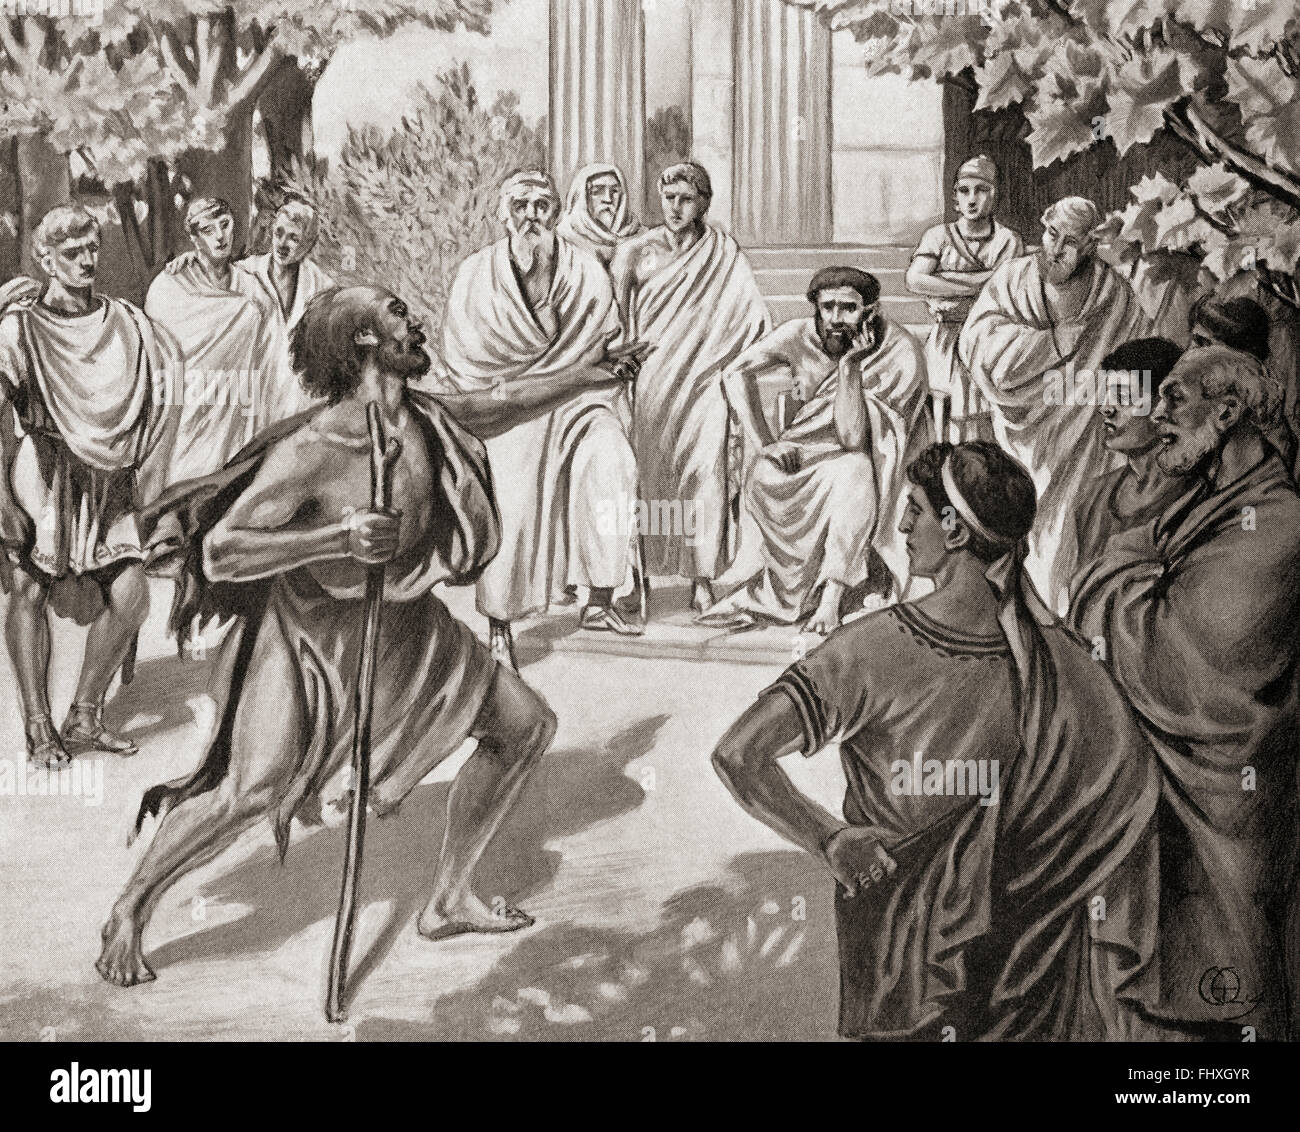 Diogenes challenging Plato in the Academy at Athens.  Diogenes of Sinope, aka Diogenes the Cynic, c. 412 /404 BC - 323 BC. Greek philosopher.   Plato, c. 428/427  – 348/347 BC.  Philosopher in Classical Greece and founder of the Academy in Athens. Stock Photo